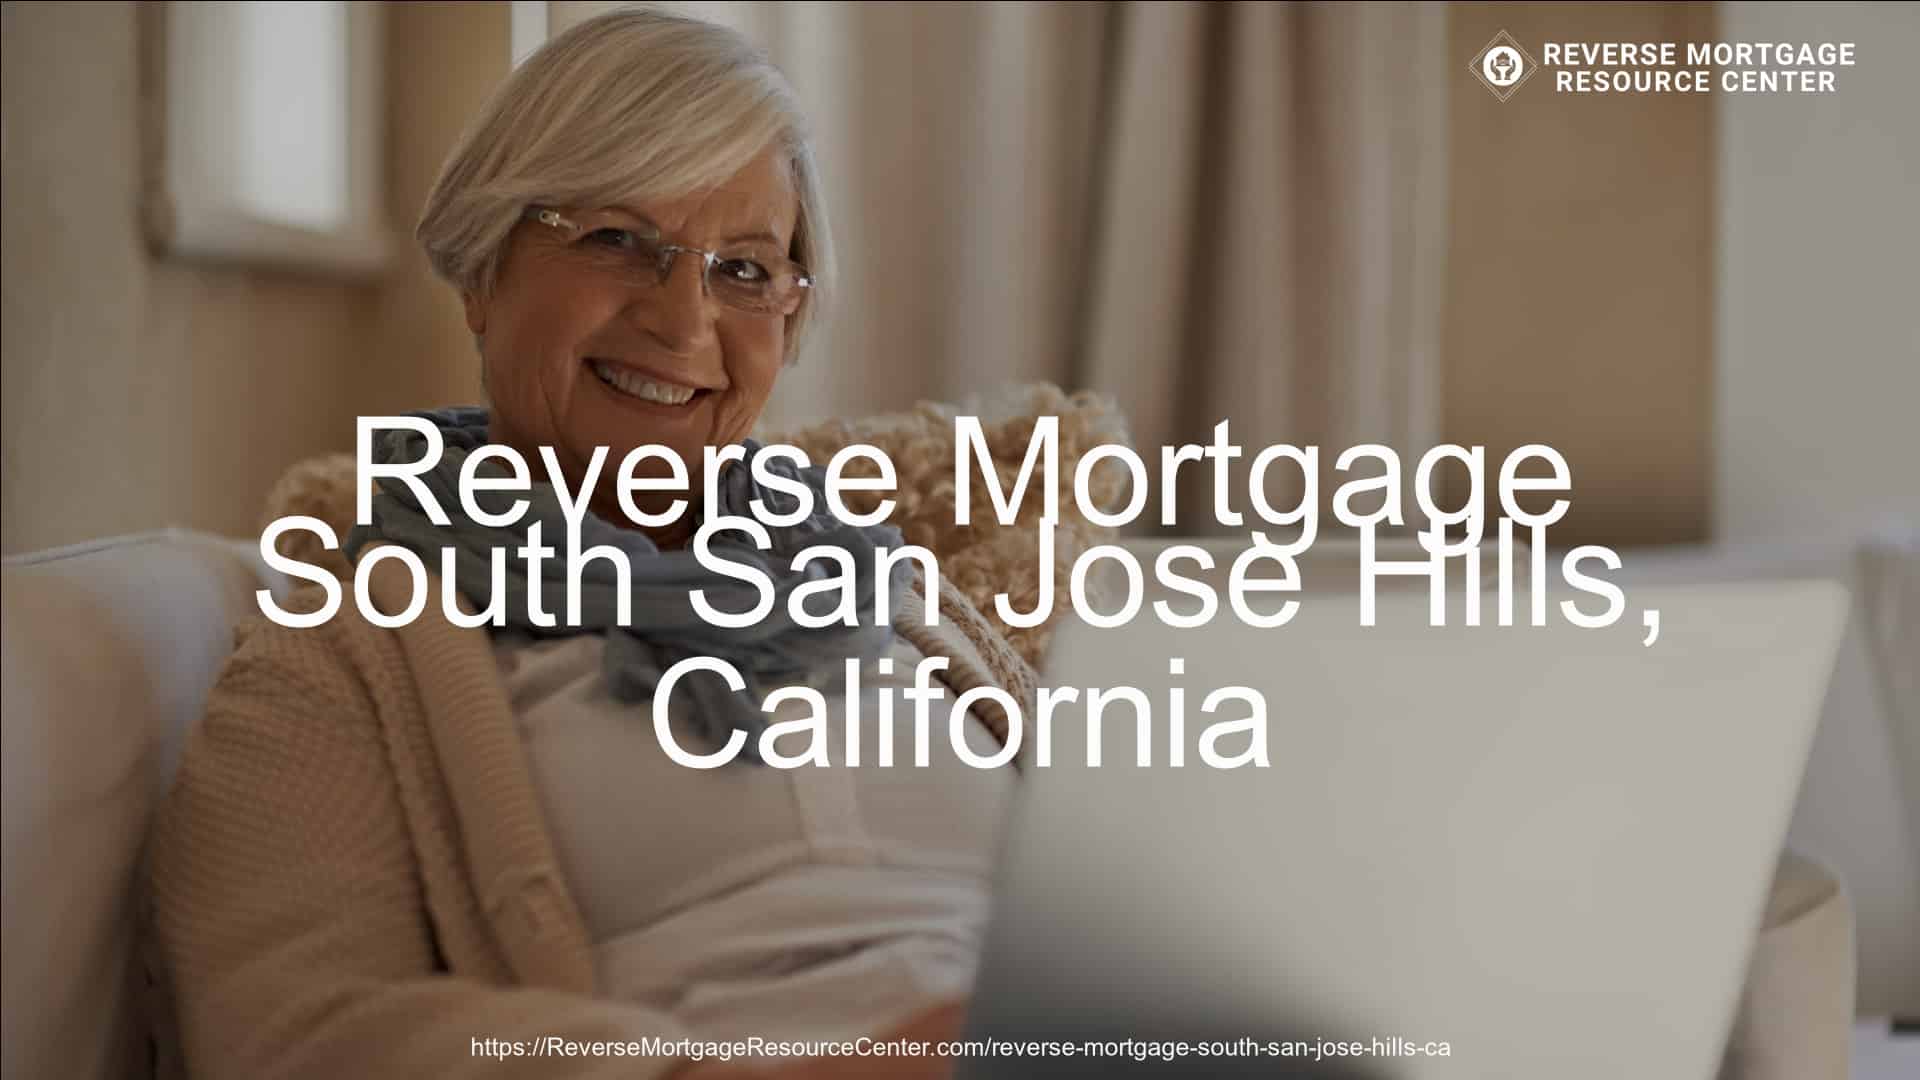 Reverse Mortgage in South San Jose Hills, CA